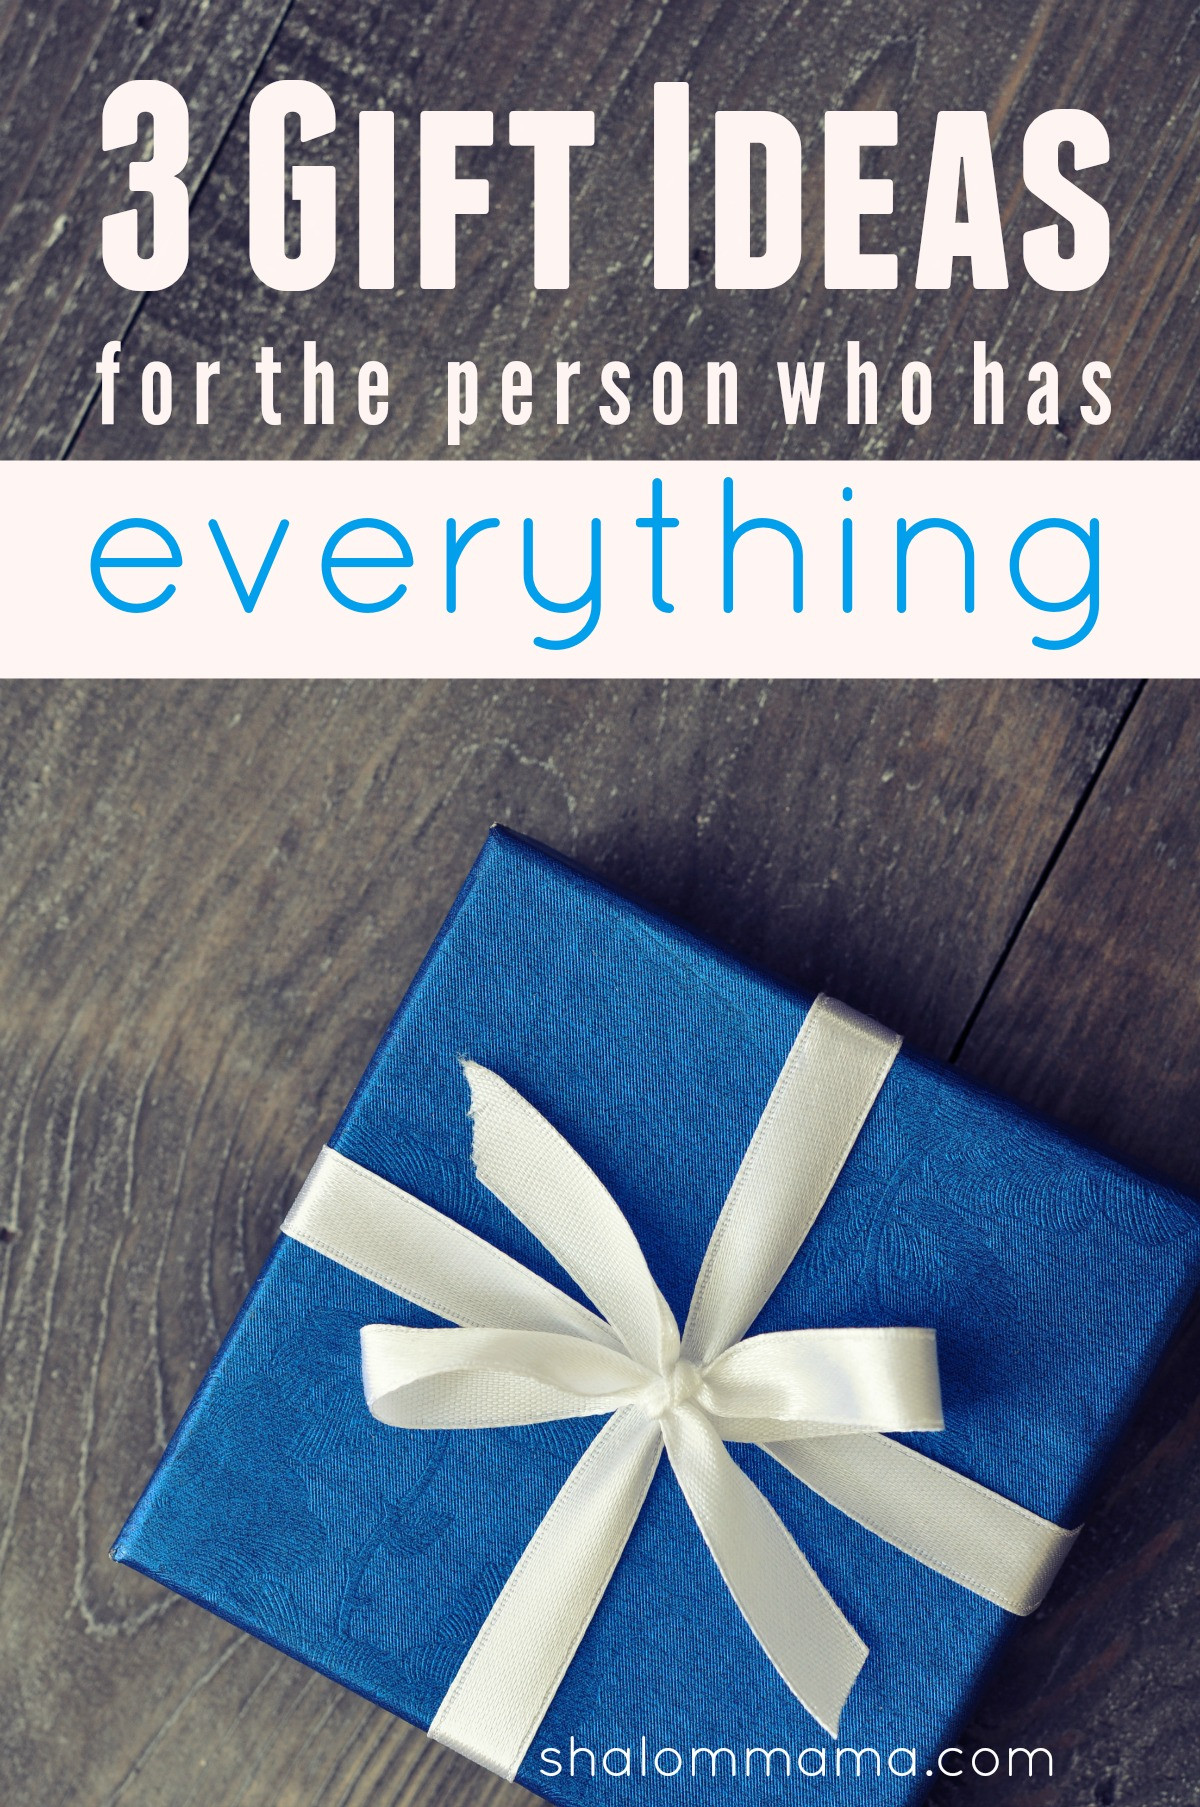 Christmas Gift Ideas For The Person Who Has Everything
 3 Gift Ideas for the Person Who has Everything